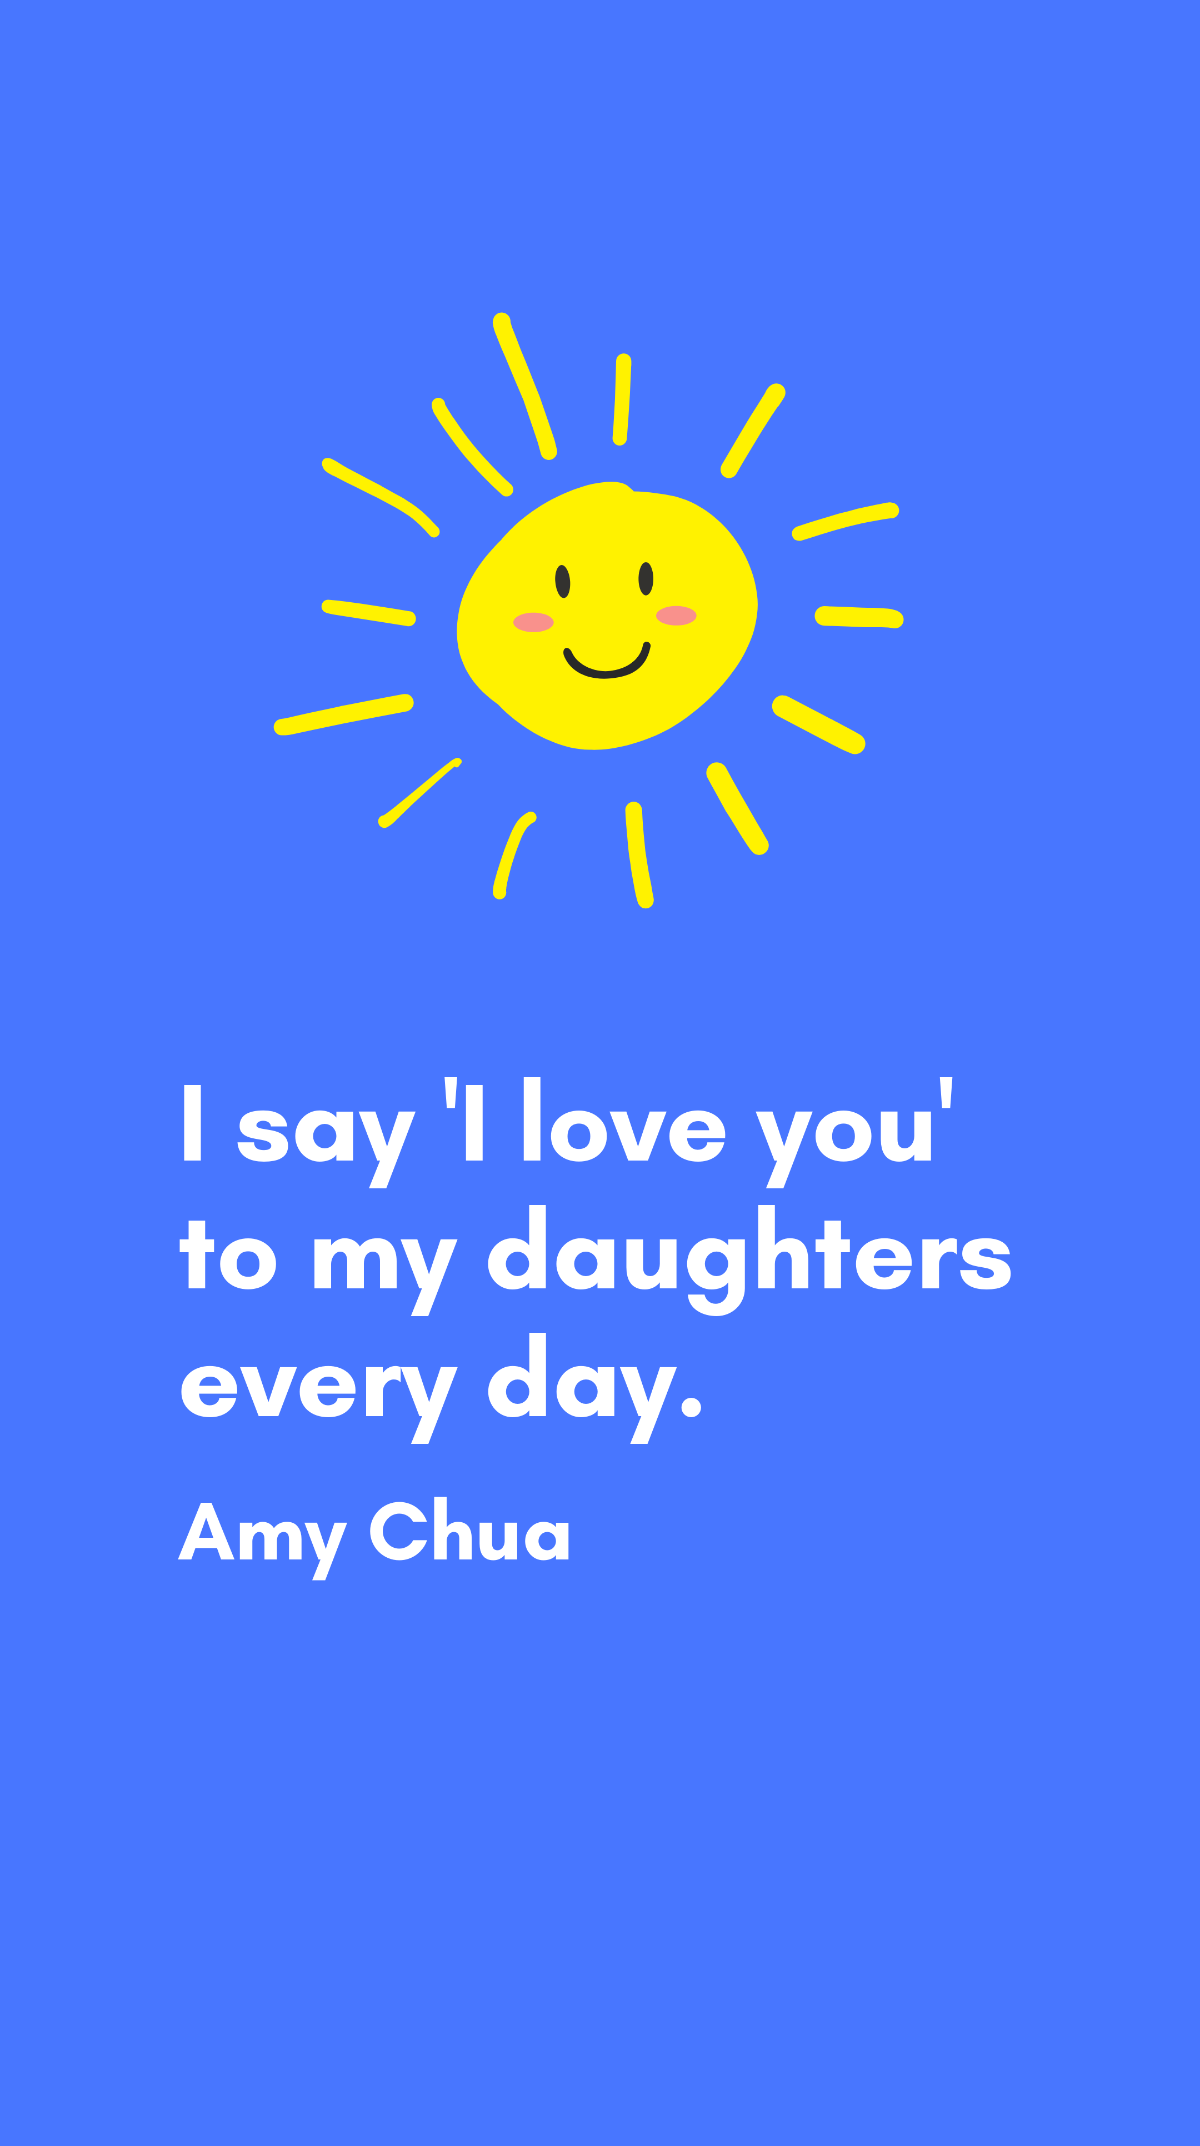 Amy Chua - I say 'I love you' to my daughters every day. Template